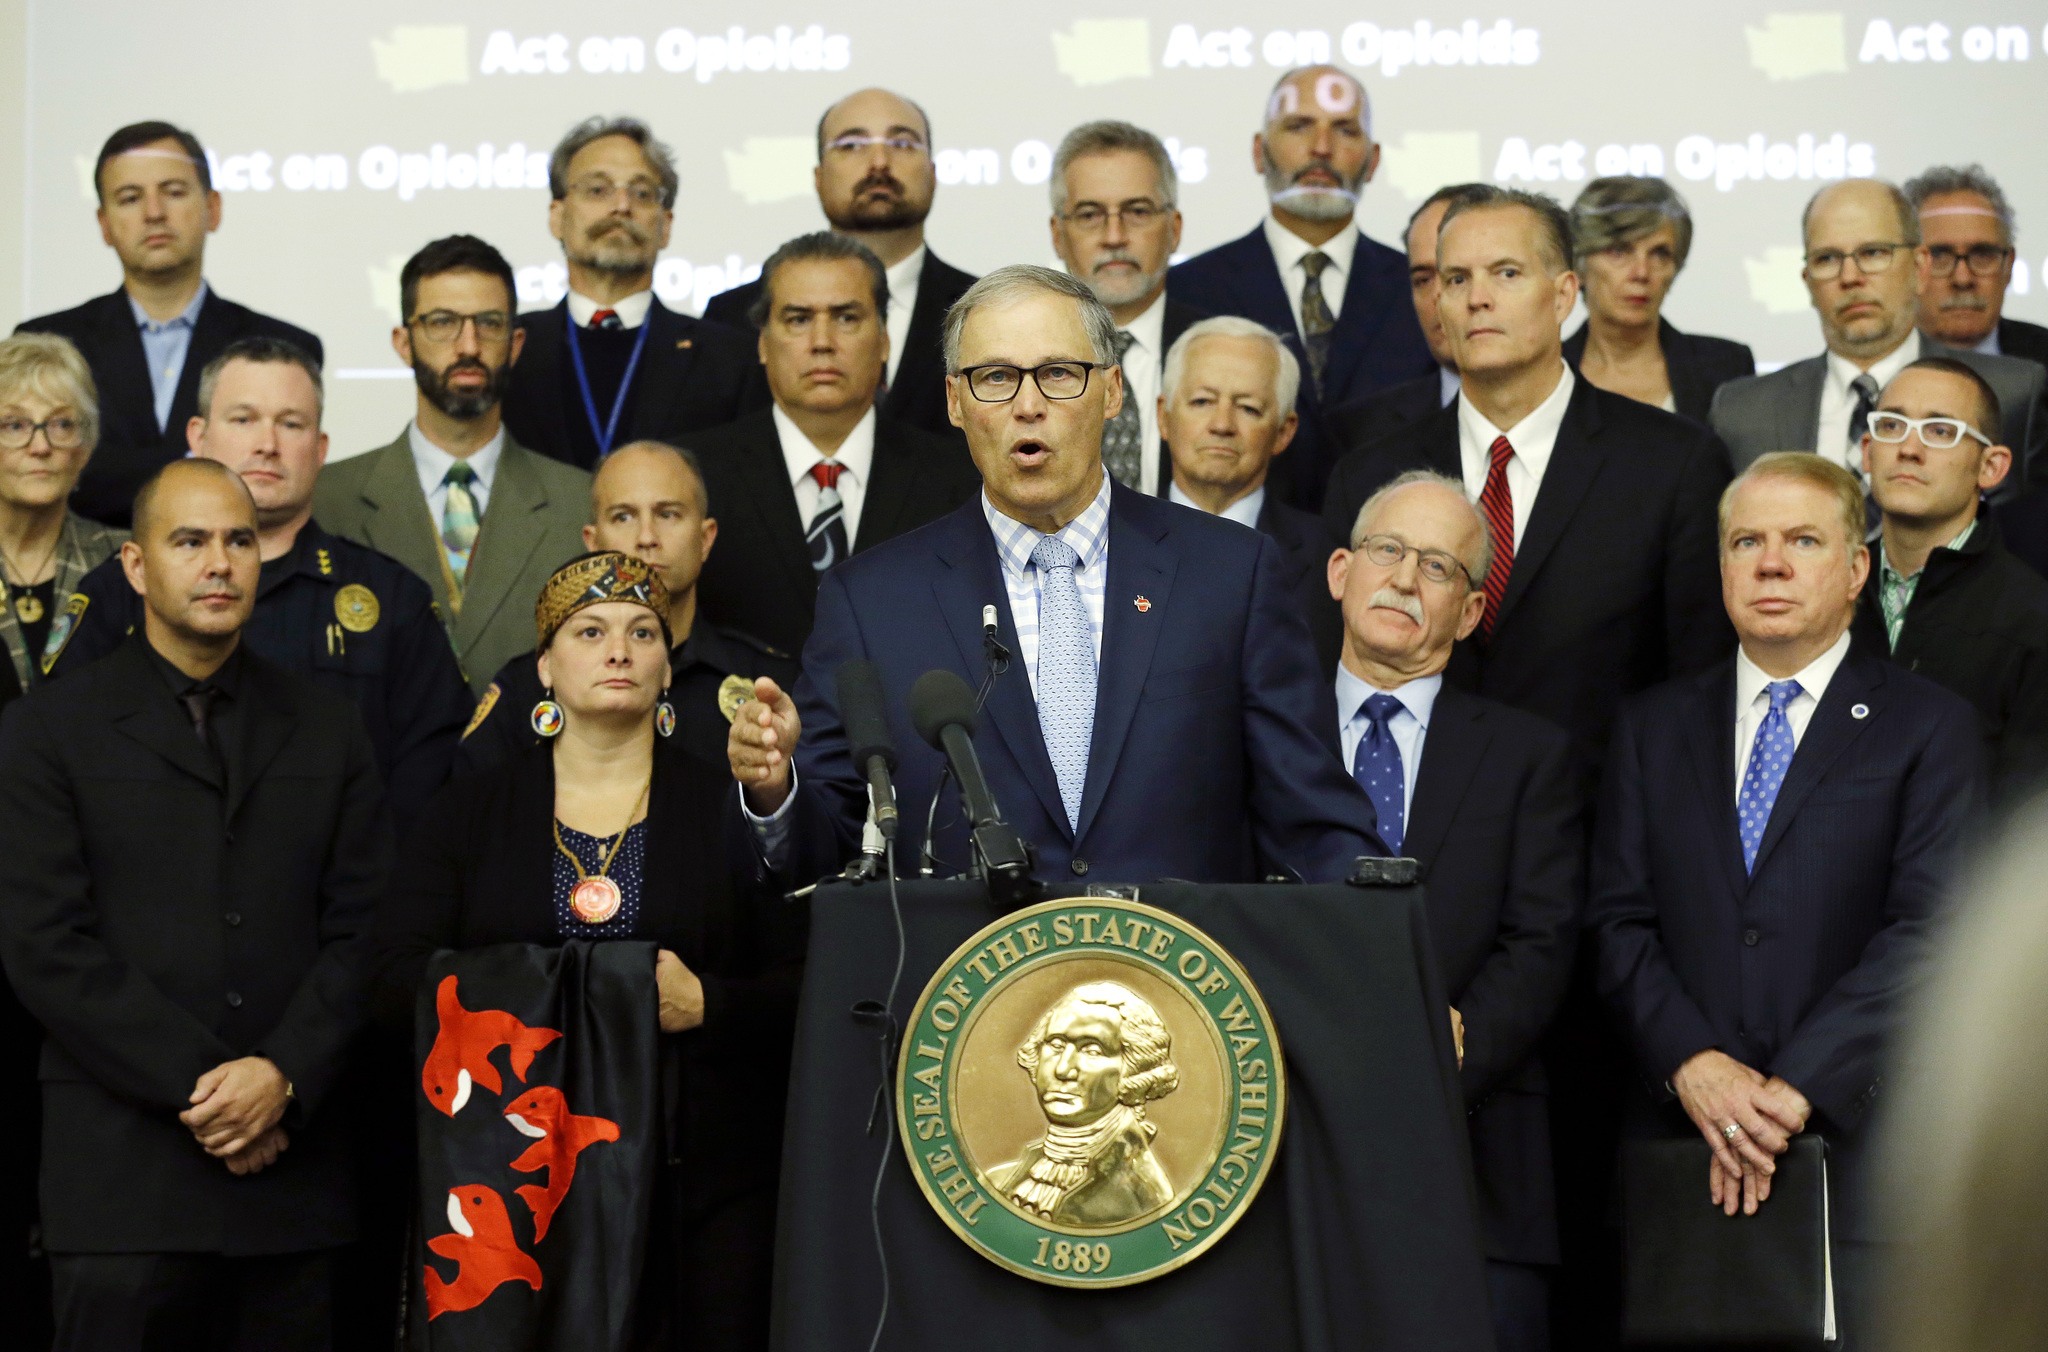 Washington Gov. Jay Inslee speaks Friday at the University of Washington Medical Center in Seattle. Inslee announced an executive order to fight the rising abuse of opioids in Washington state. (Ted S. Warren/The Associated Press)